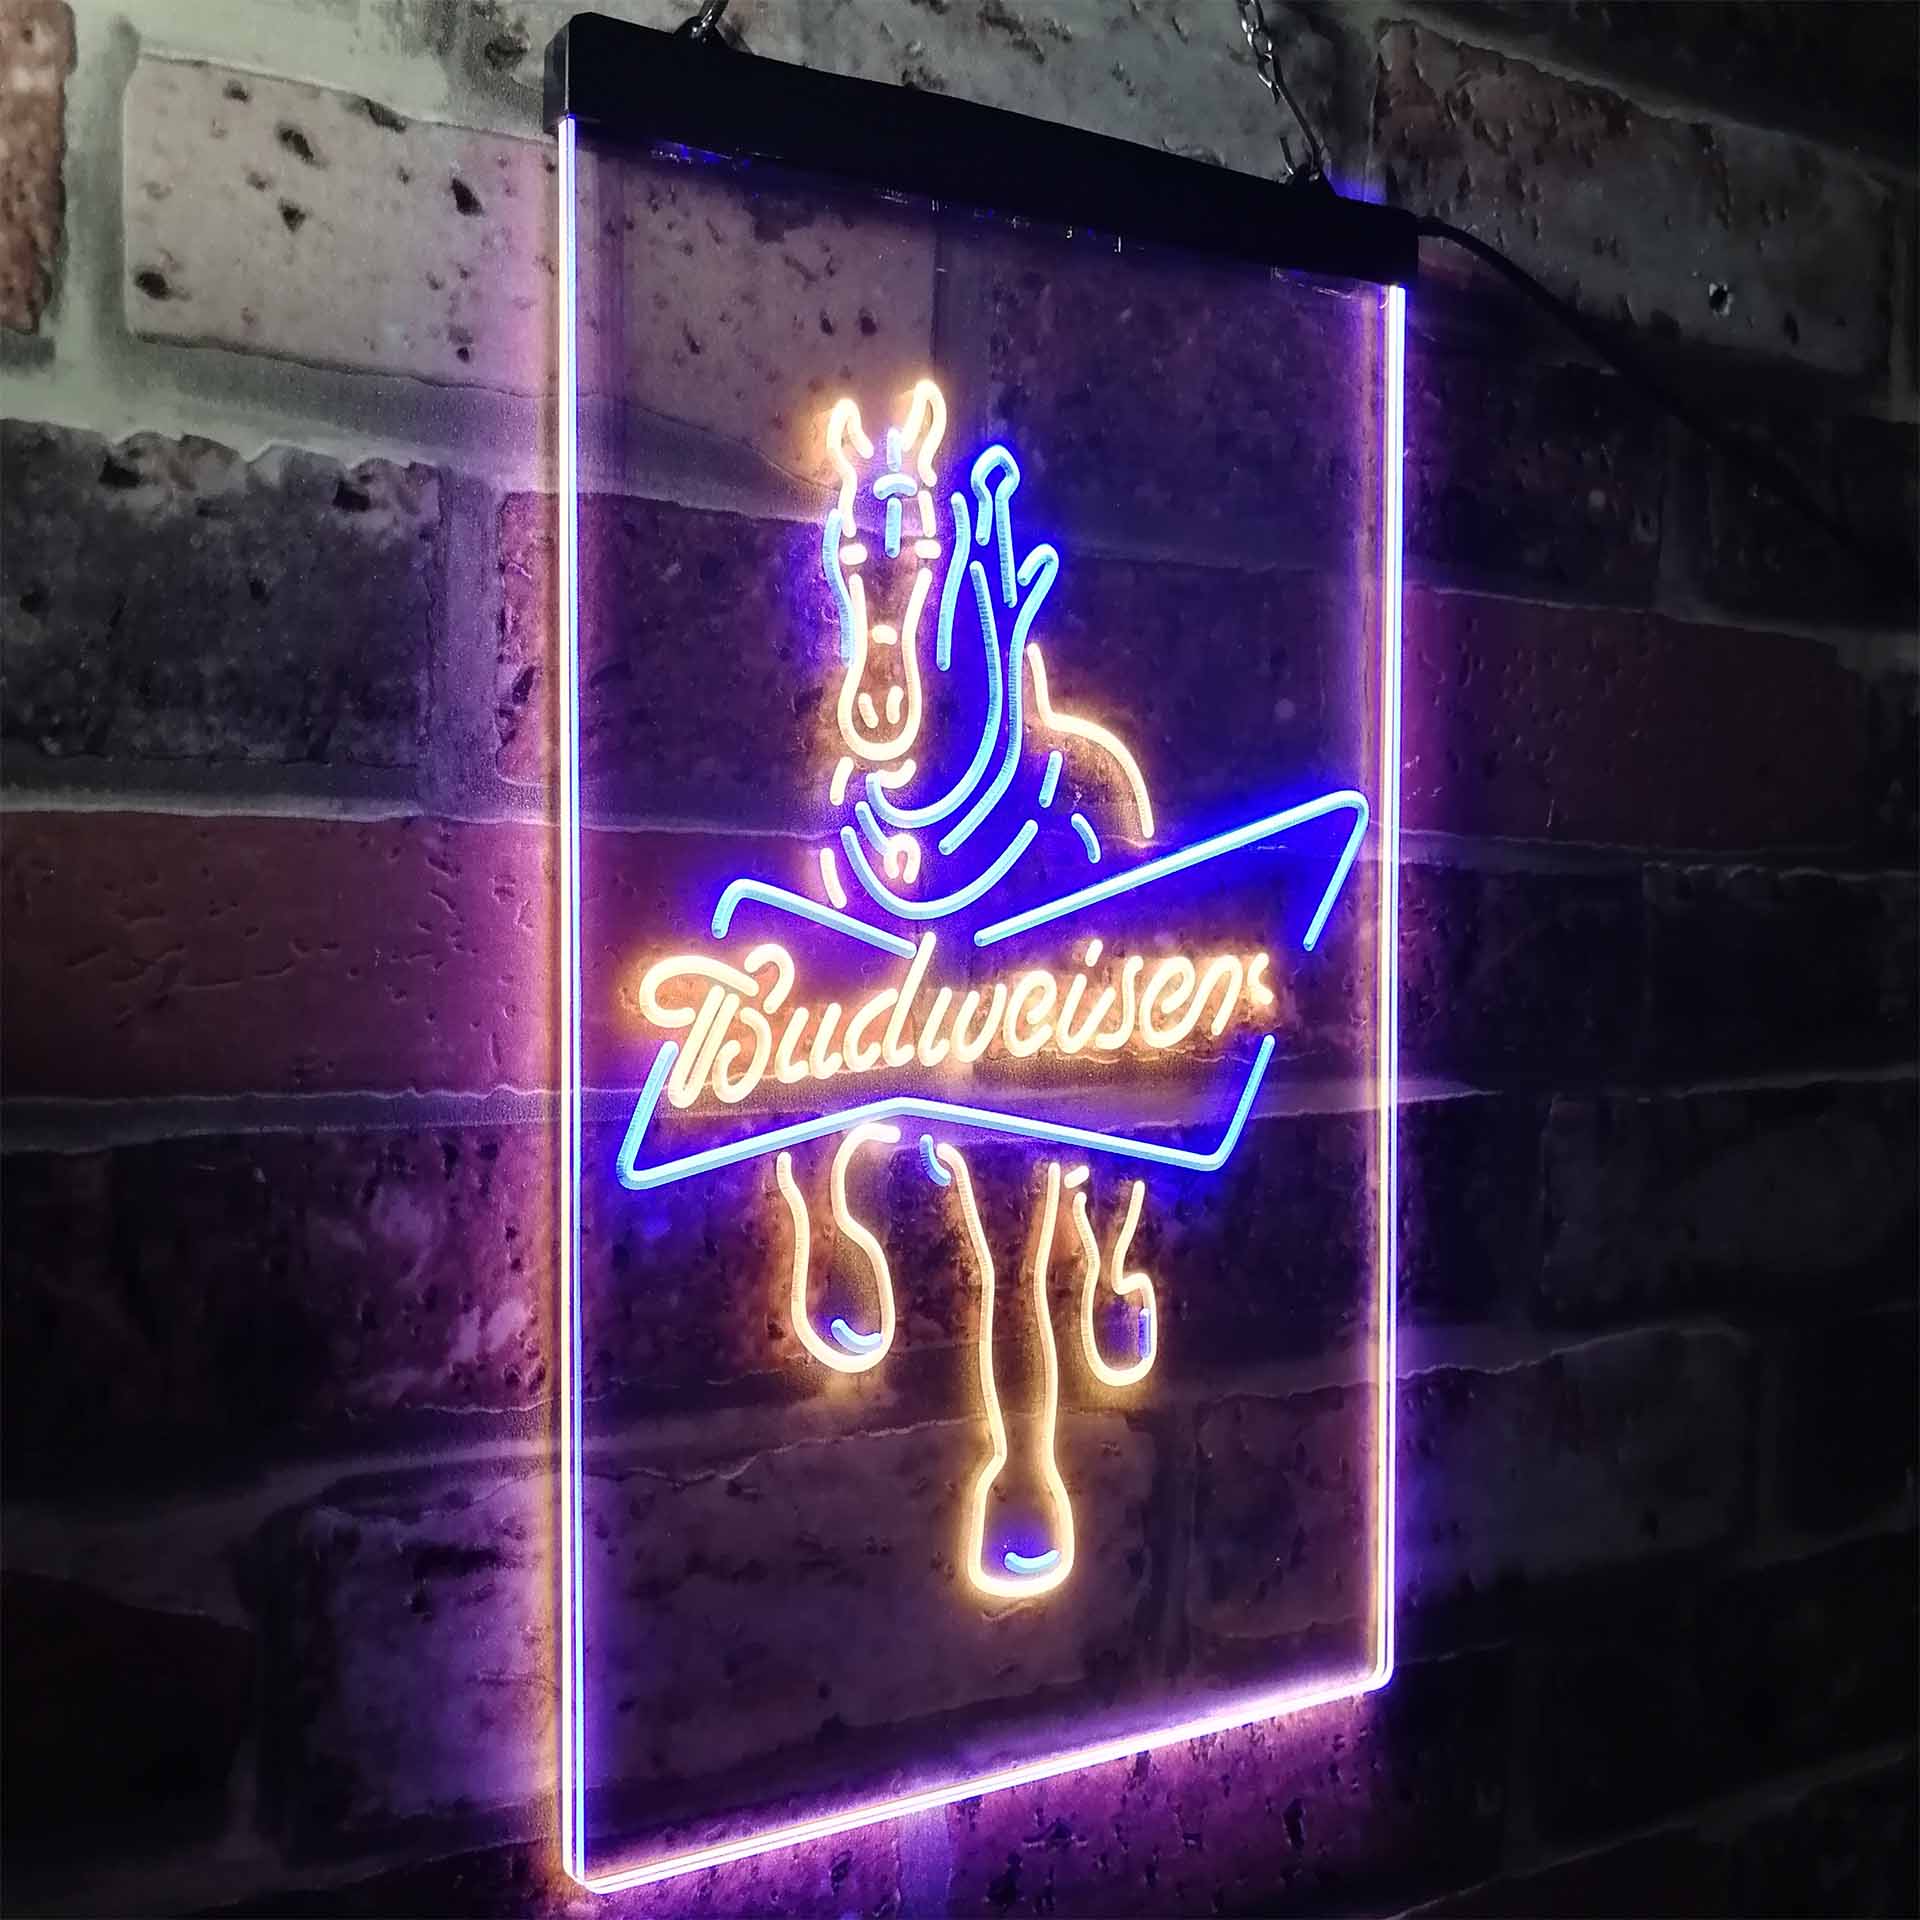 Budweiser Clydesdale Horse Neon LED Sign